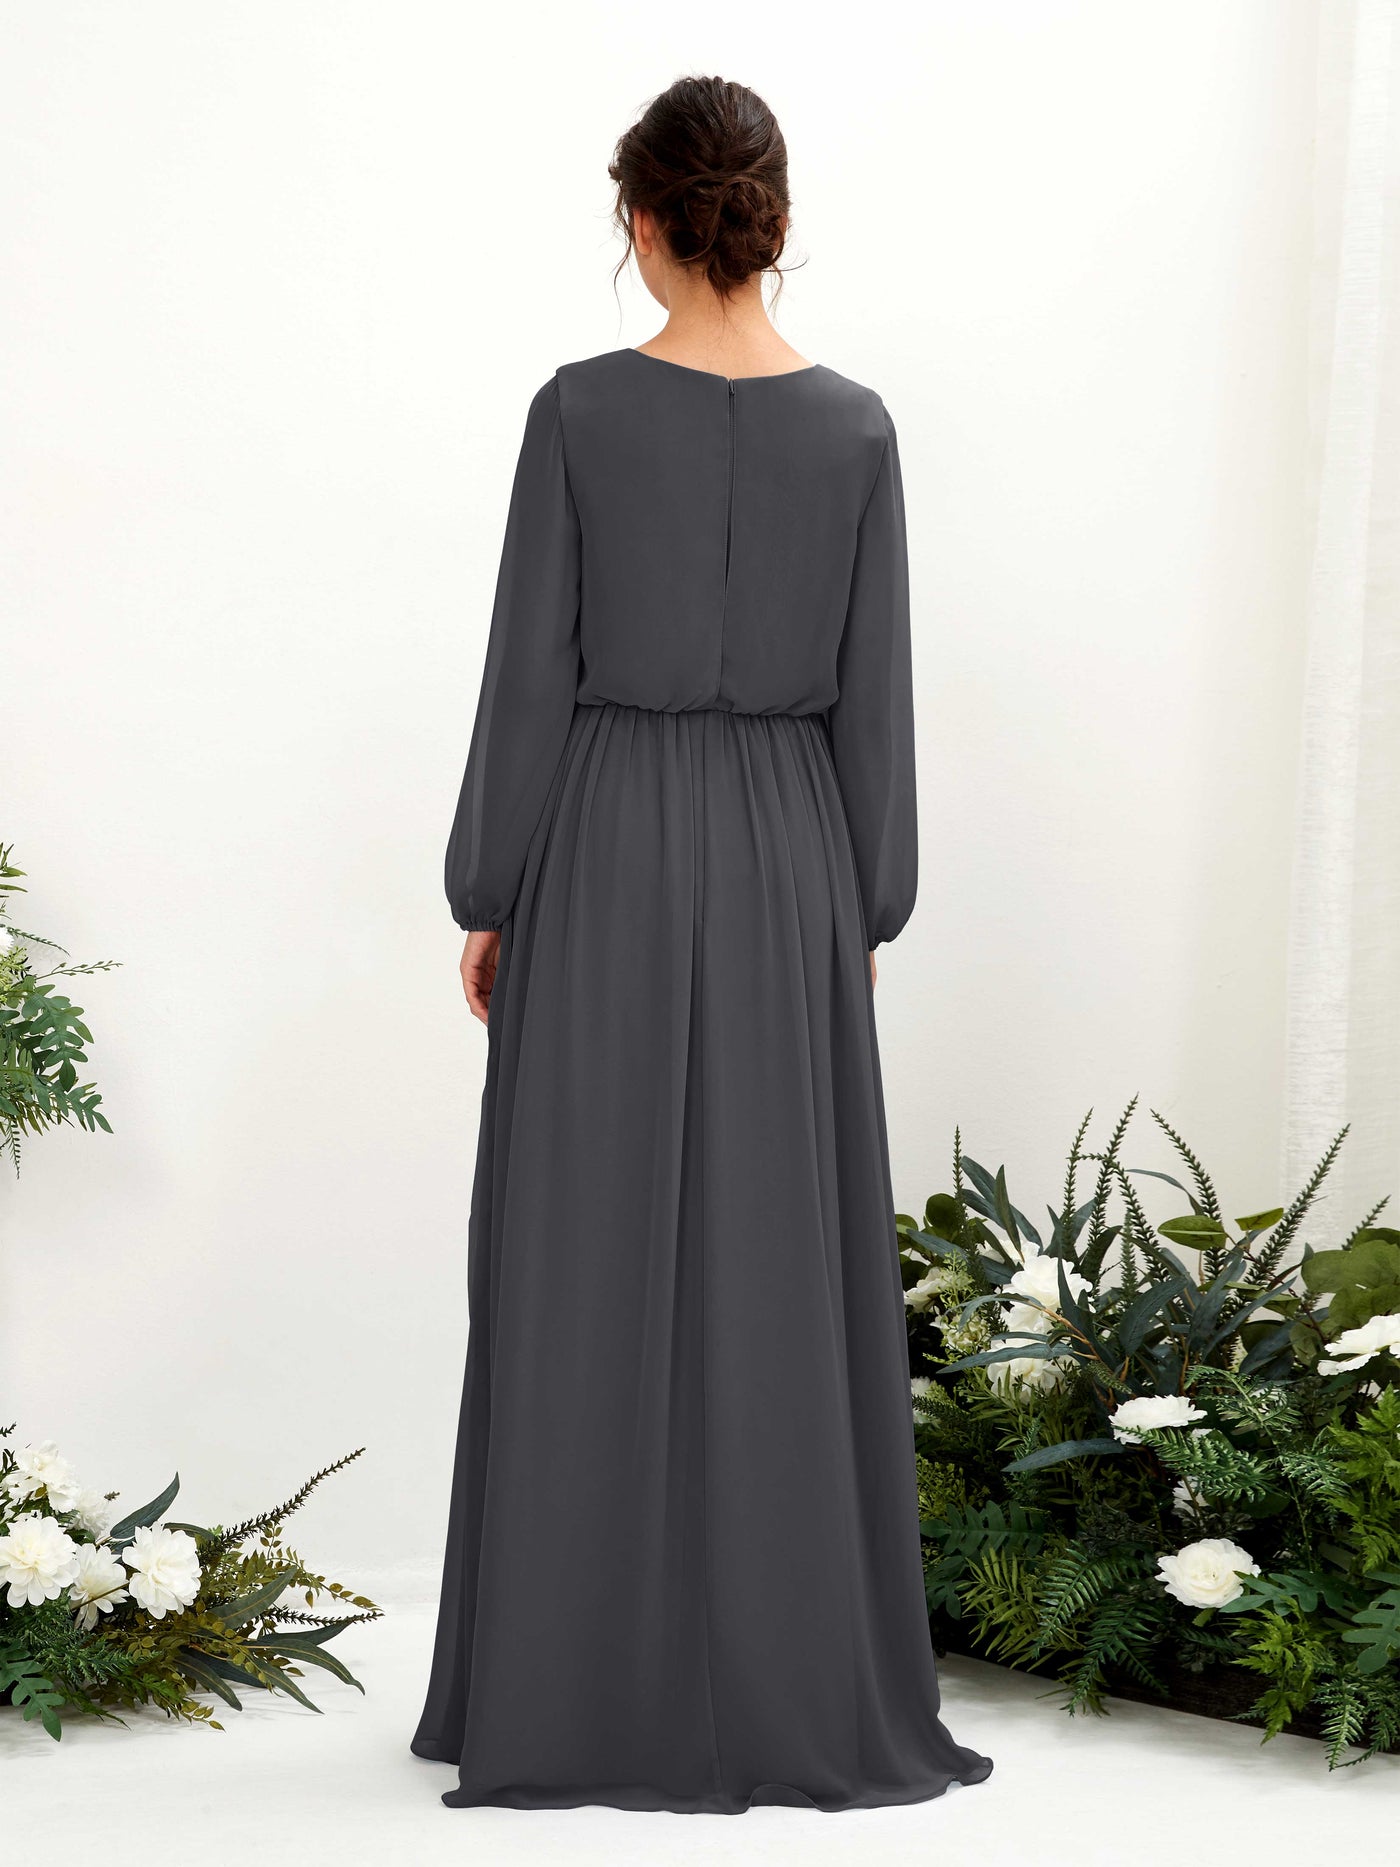 Pewter Bridesmaid Dresses Bridesmaid Dress A-line Chiffon V-neck Full Length Long Sleeves Wedding Party Dress (81223838)#color_pewter